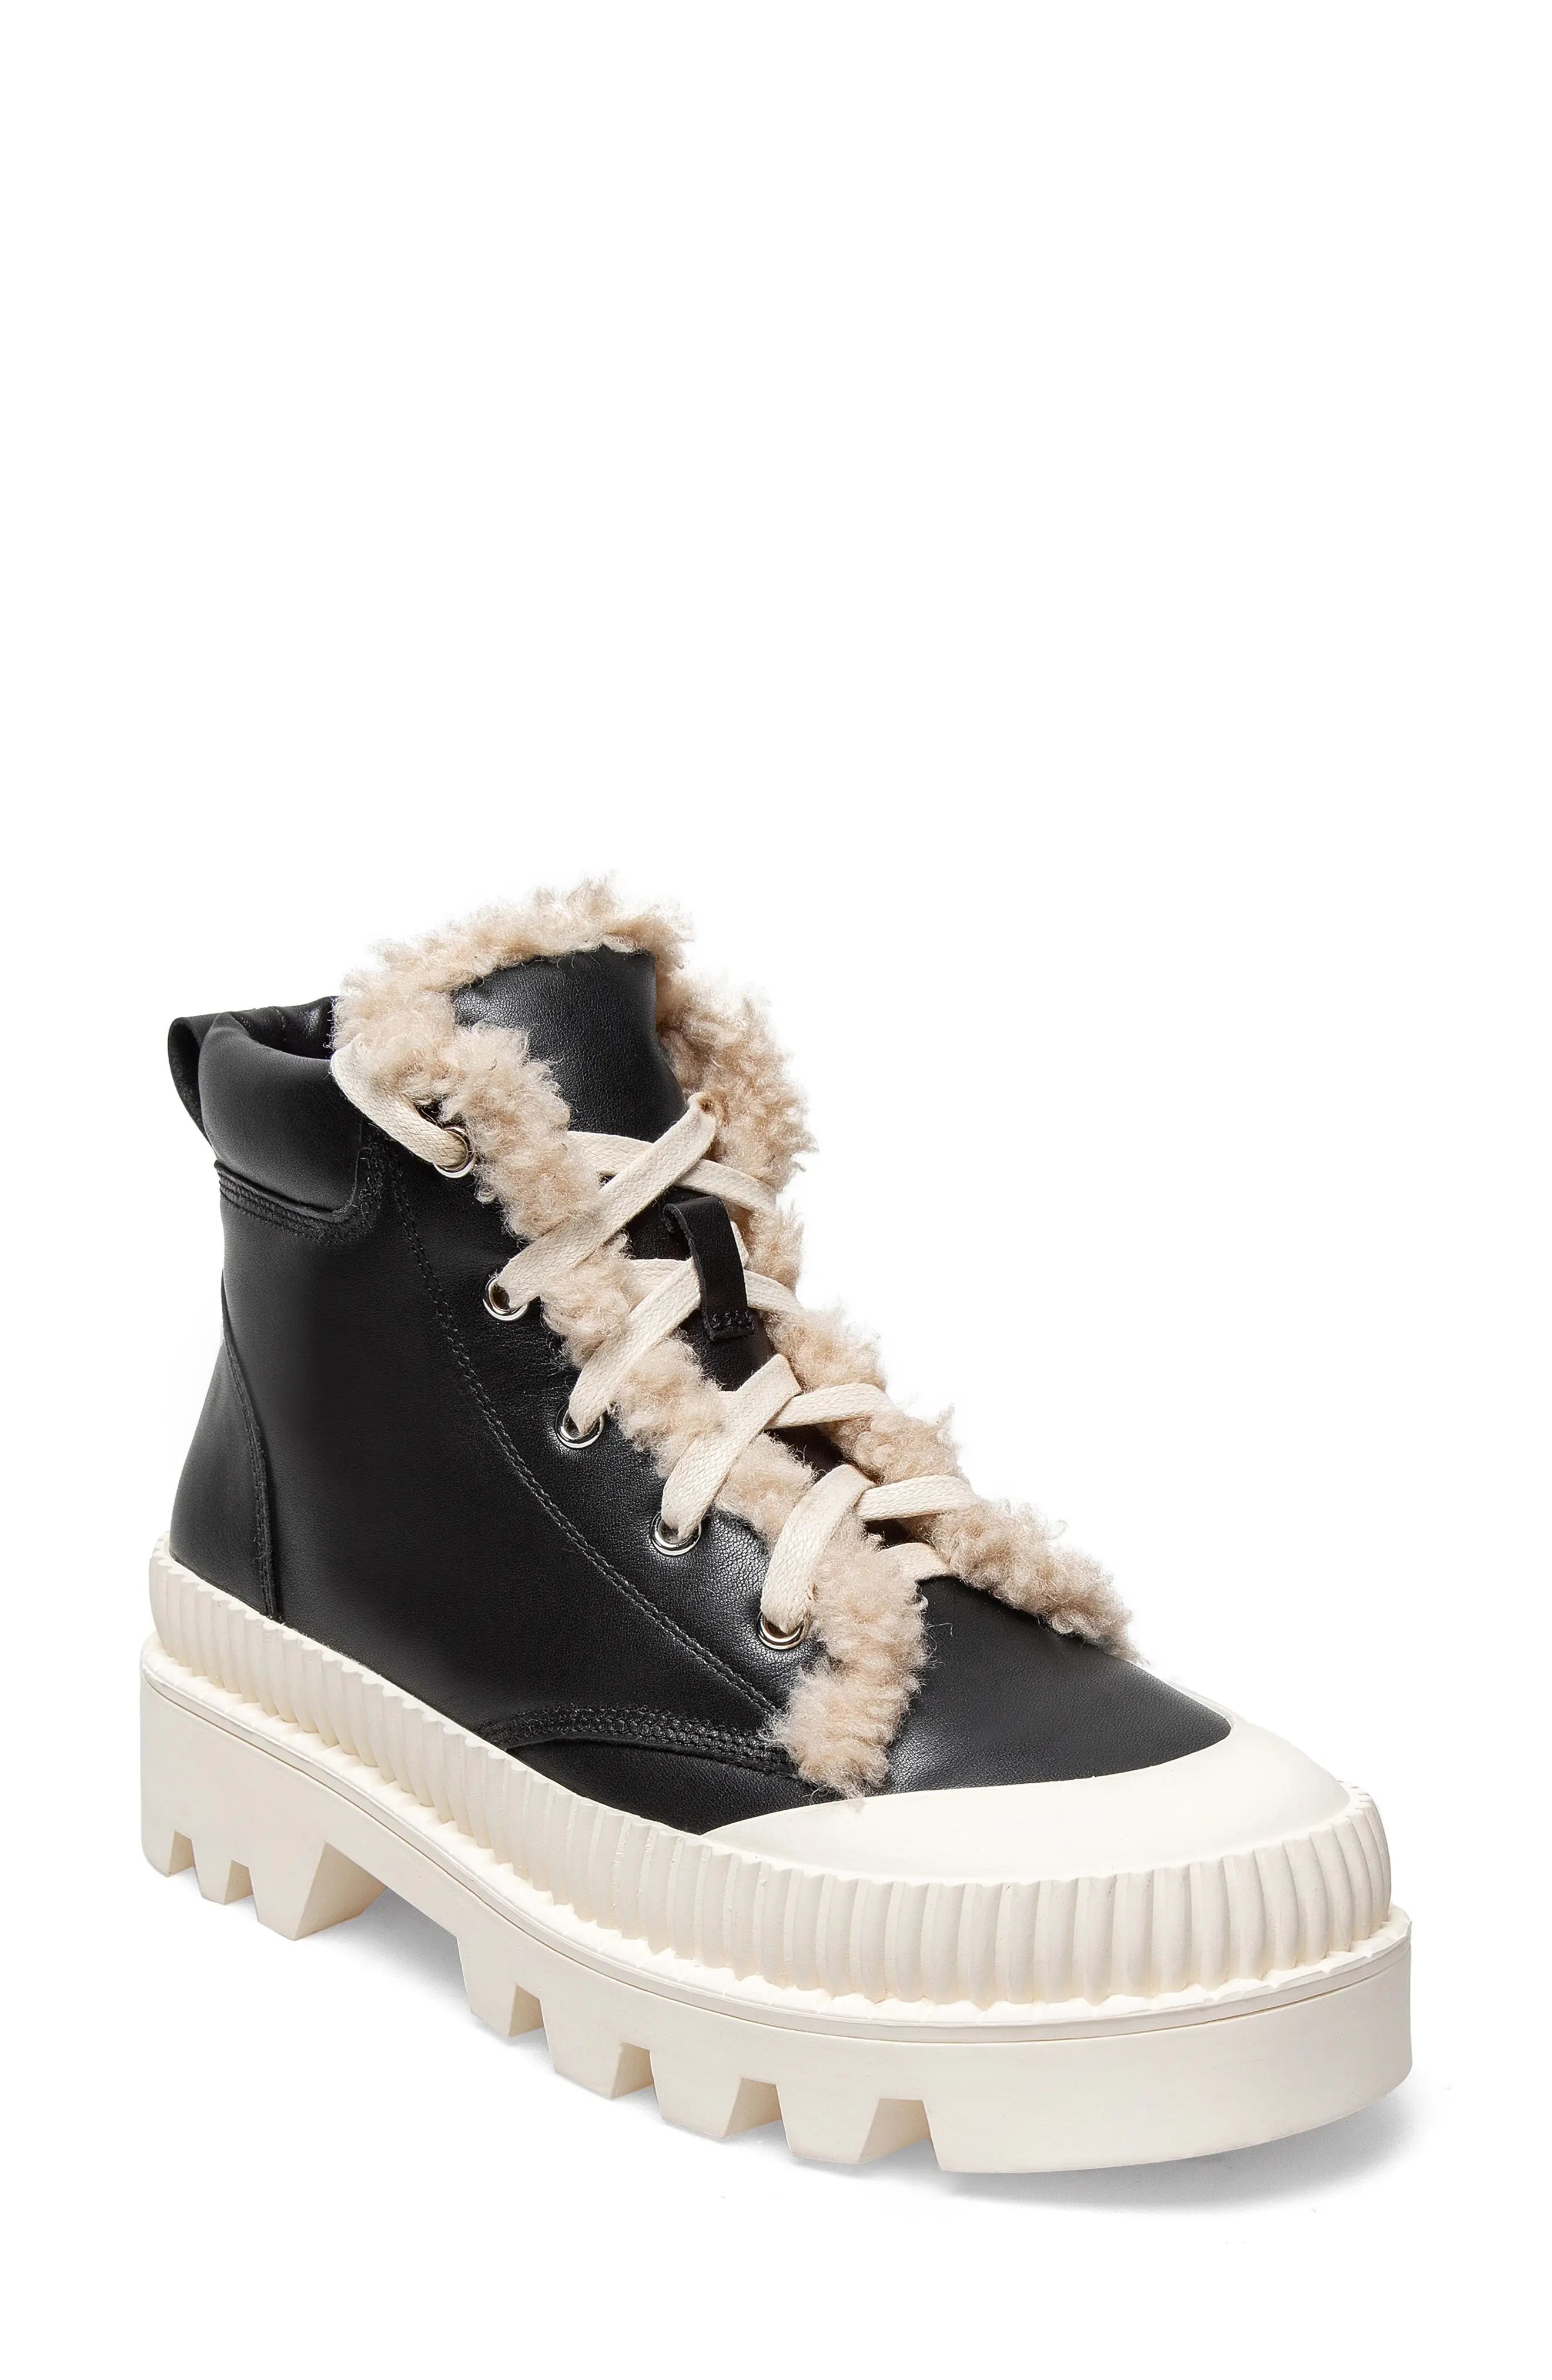 Silent D Peato Leather Sneaker, Size 6.5Us in Black Leather at Nordstrom | Nordstrom